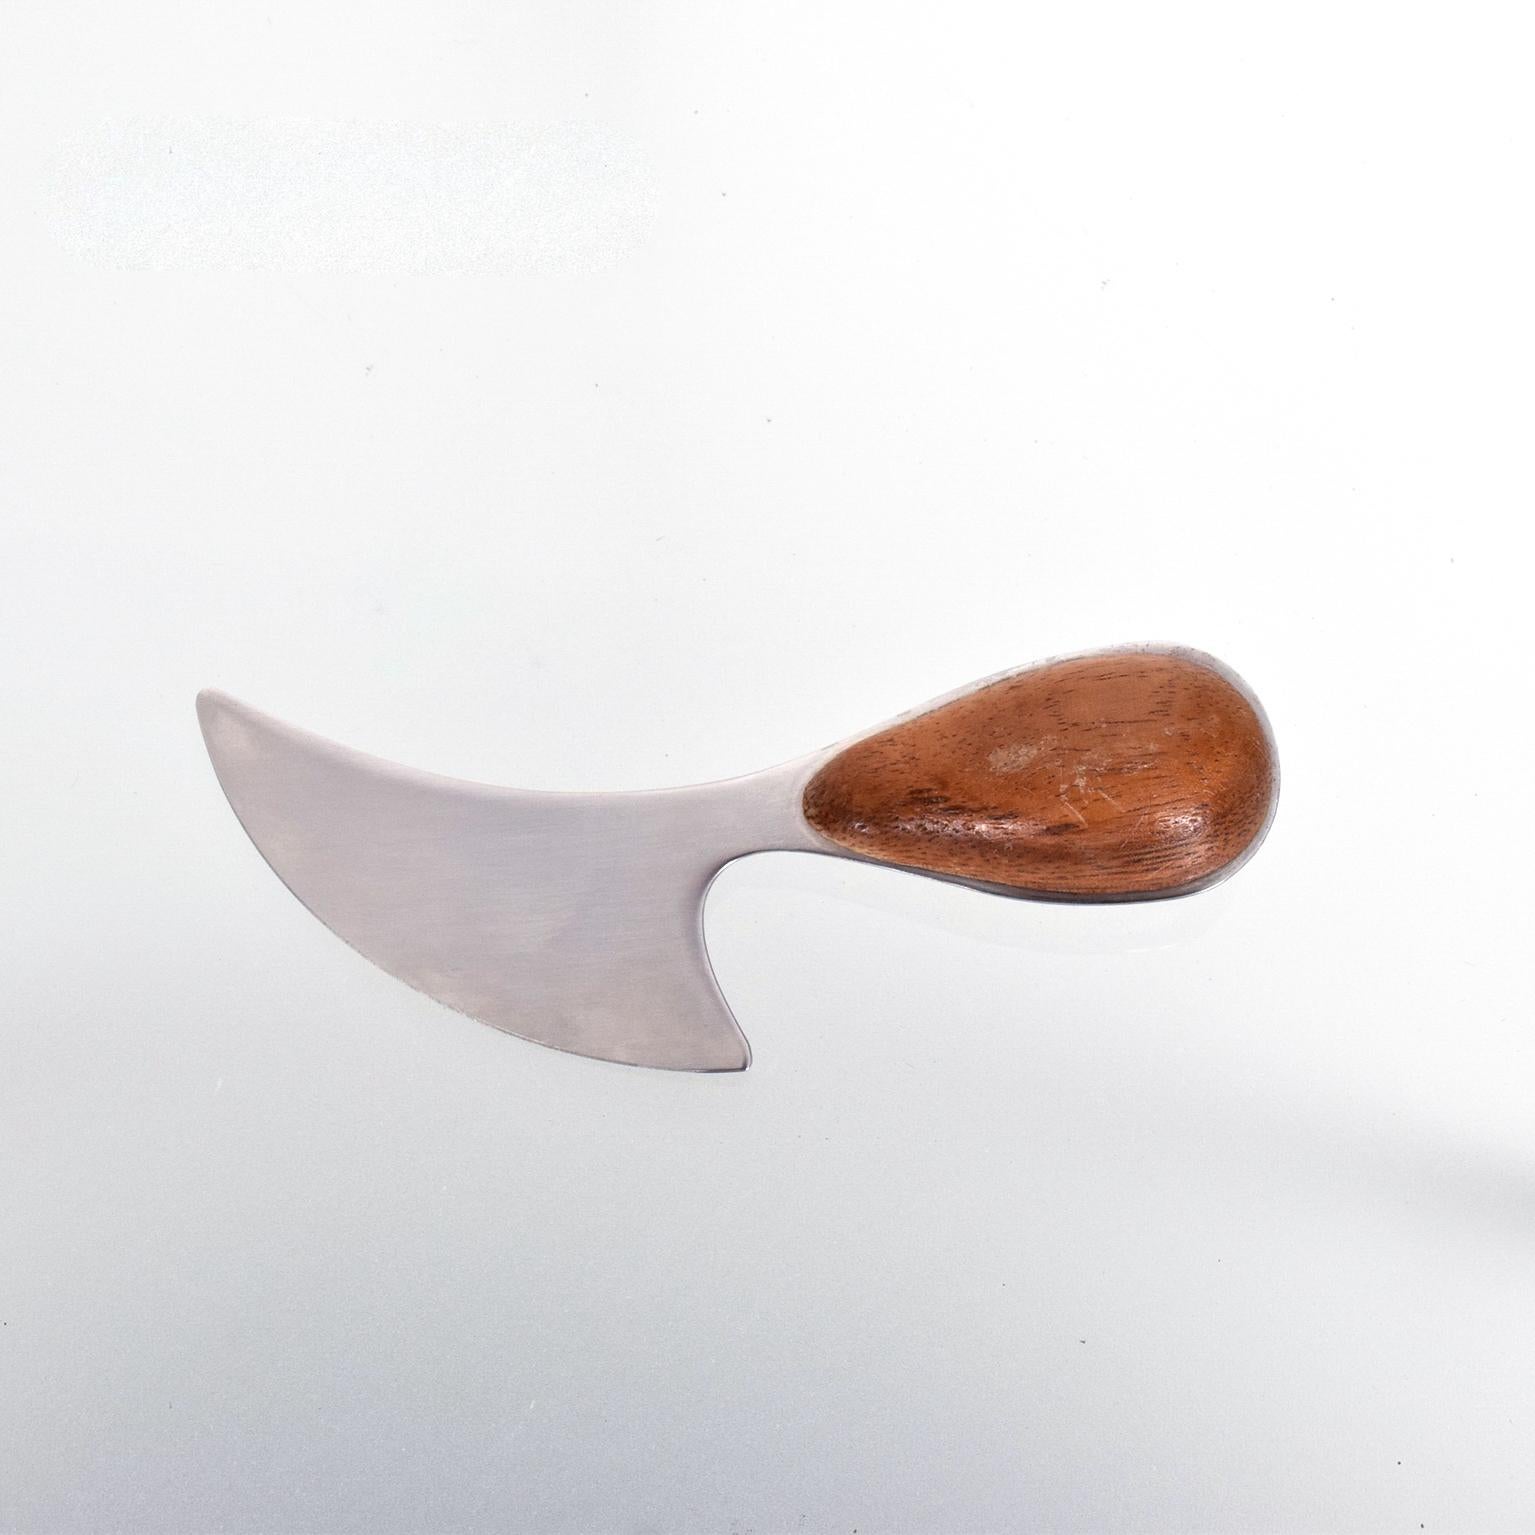 Just for you: Mid-Century Modern Denmark petite cheese server knife by Dansk in stainless steel and teak, circa 1960s.
Sculpted cheese knife designed by master Jeweler and silversmith Vivianna Torun for Dansk.
Measures: Height 5.5 in. (13.97